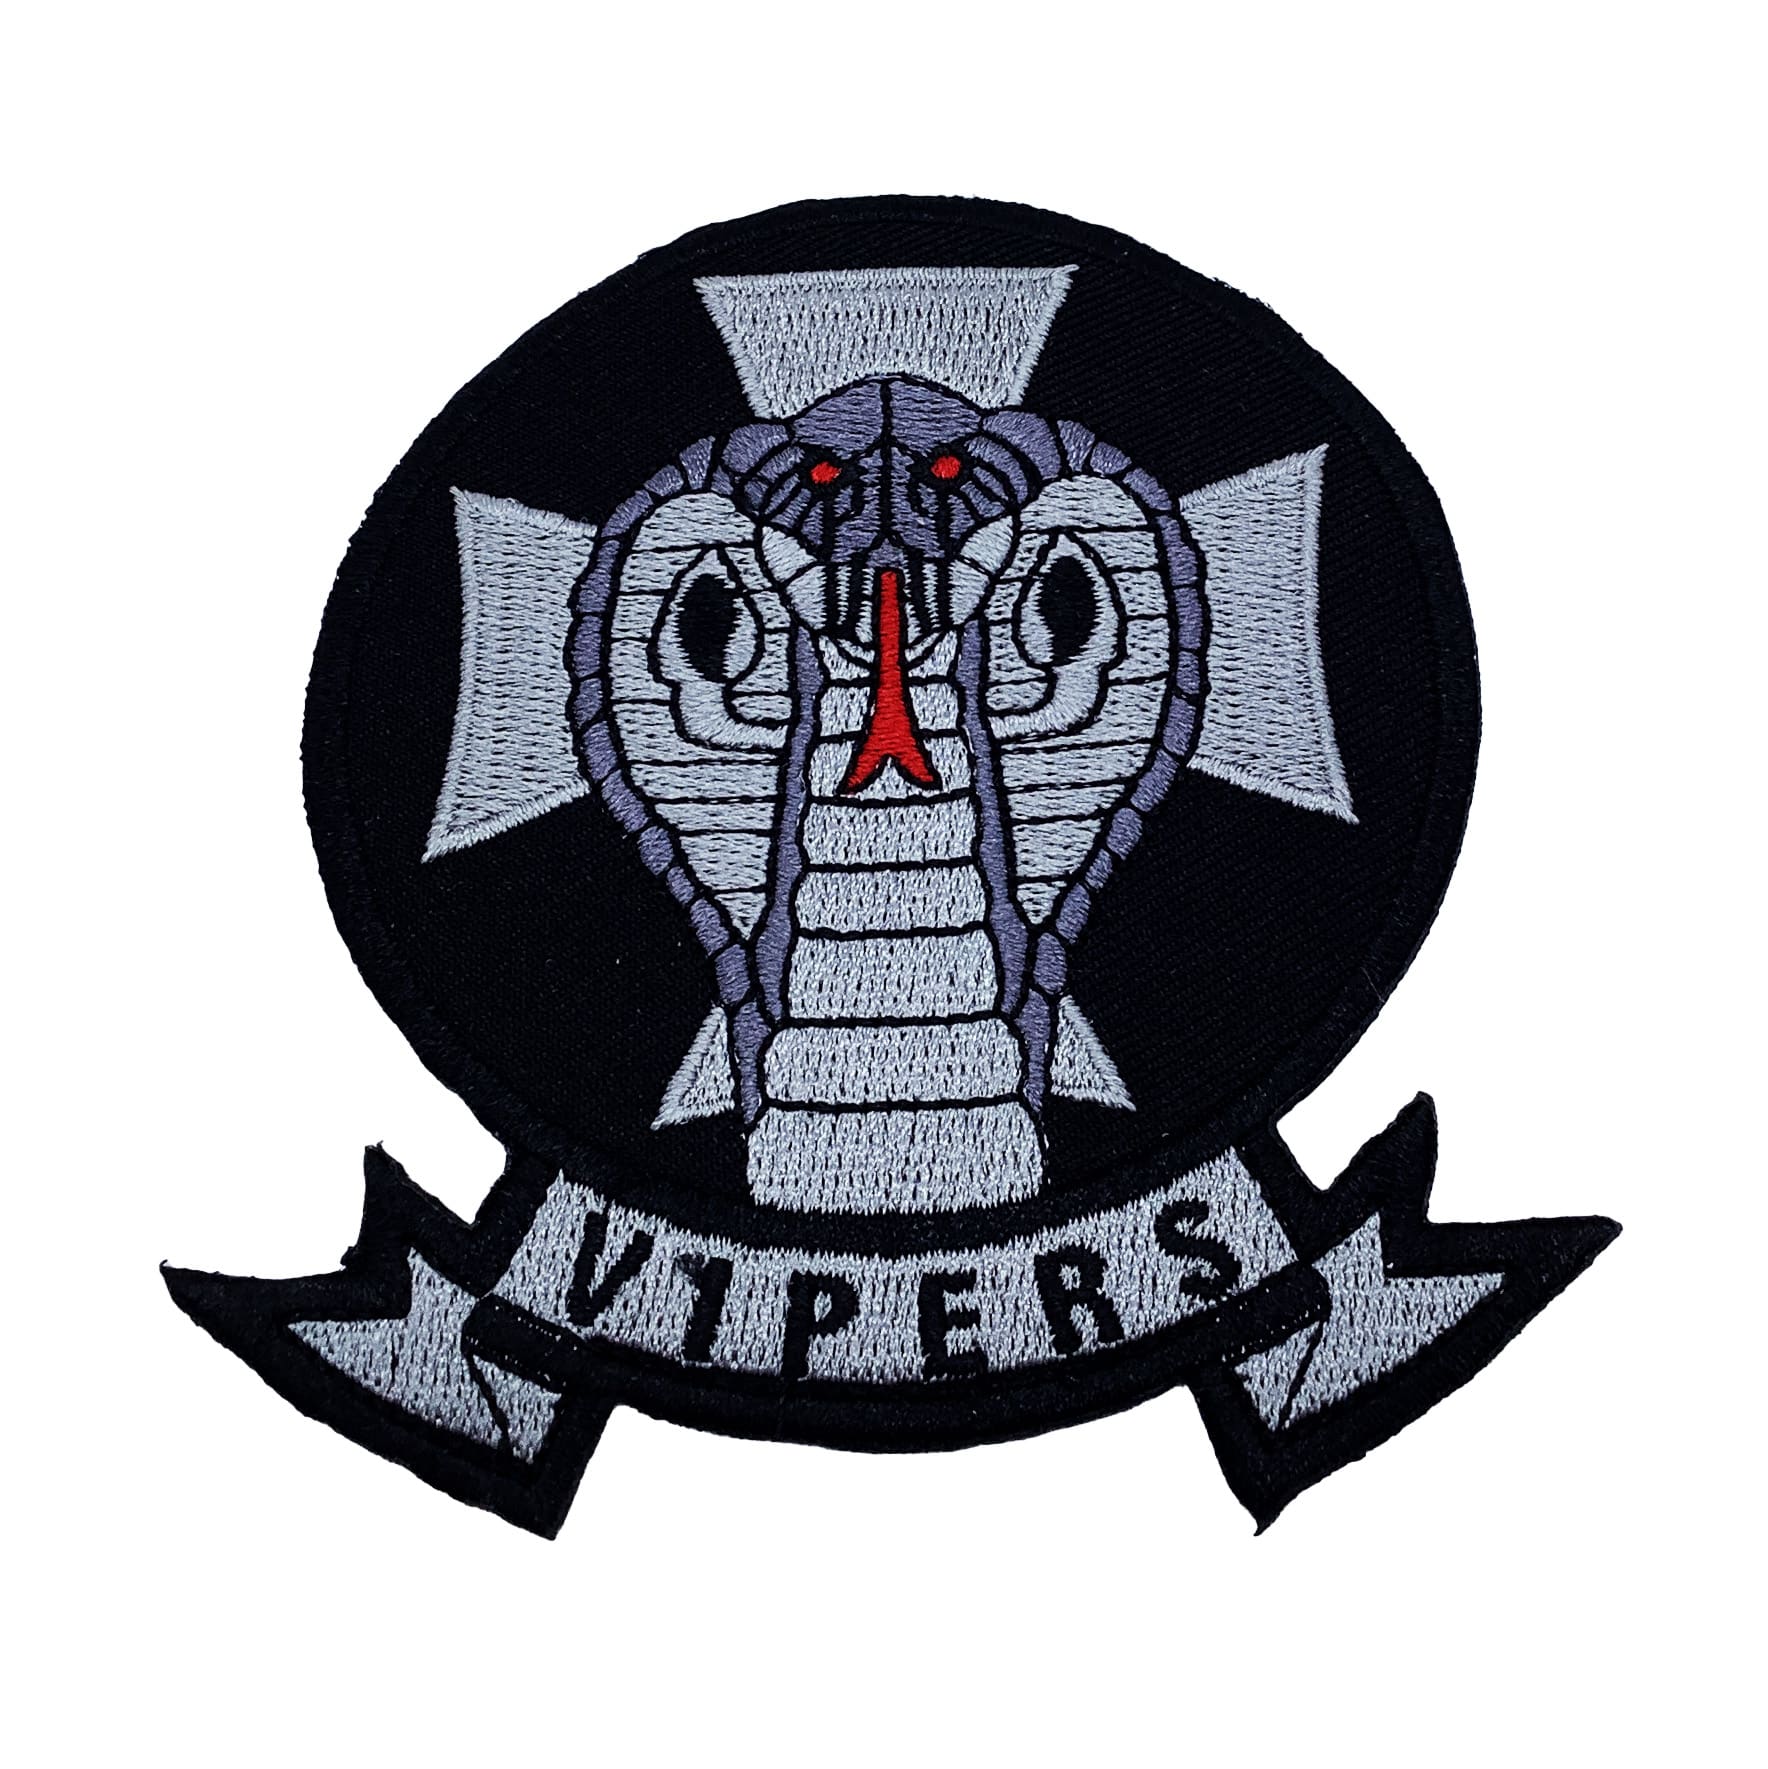 HMLA-169 VIPERS (Black/Gray) Patch – With Hook and Loop